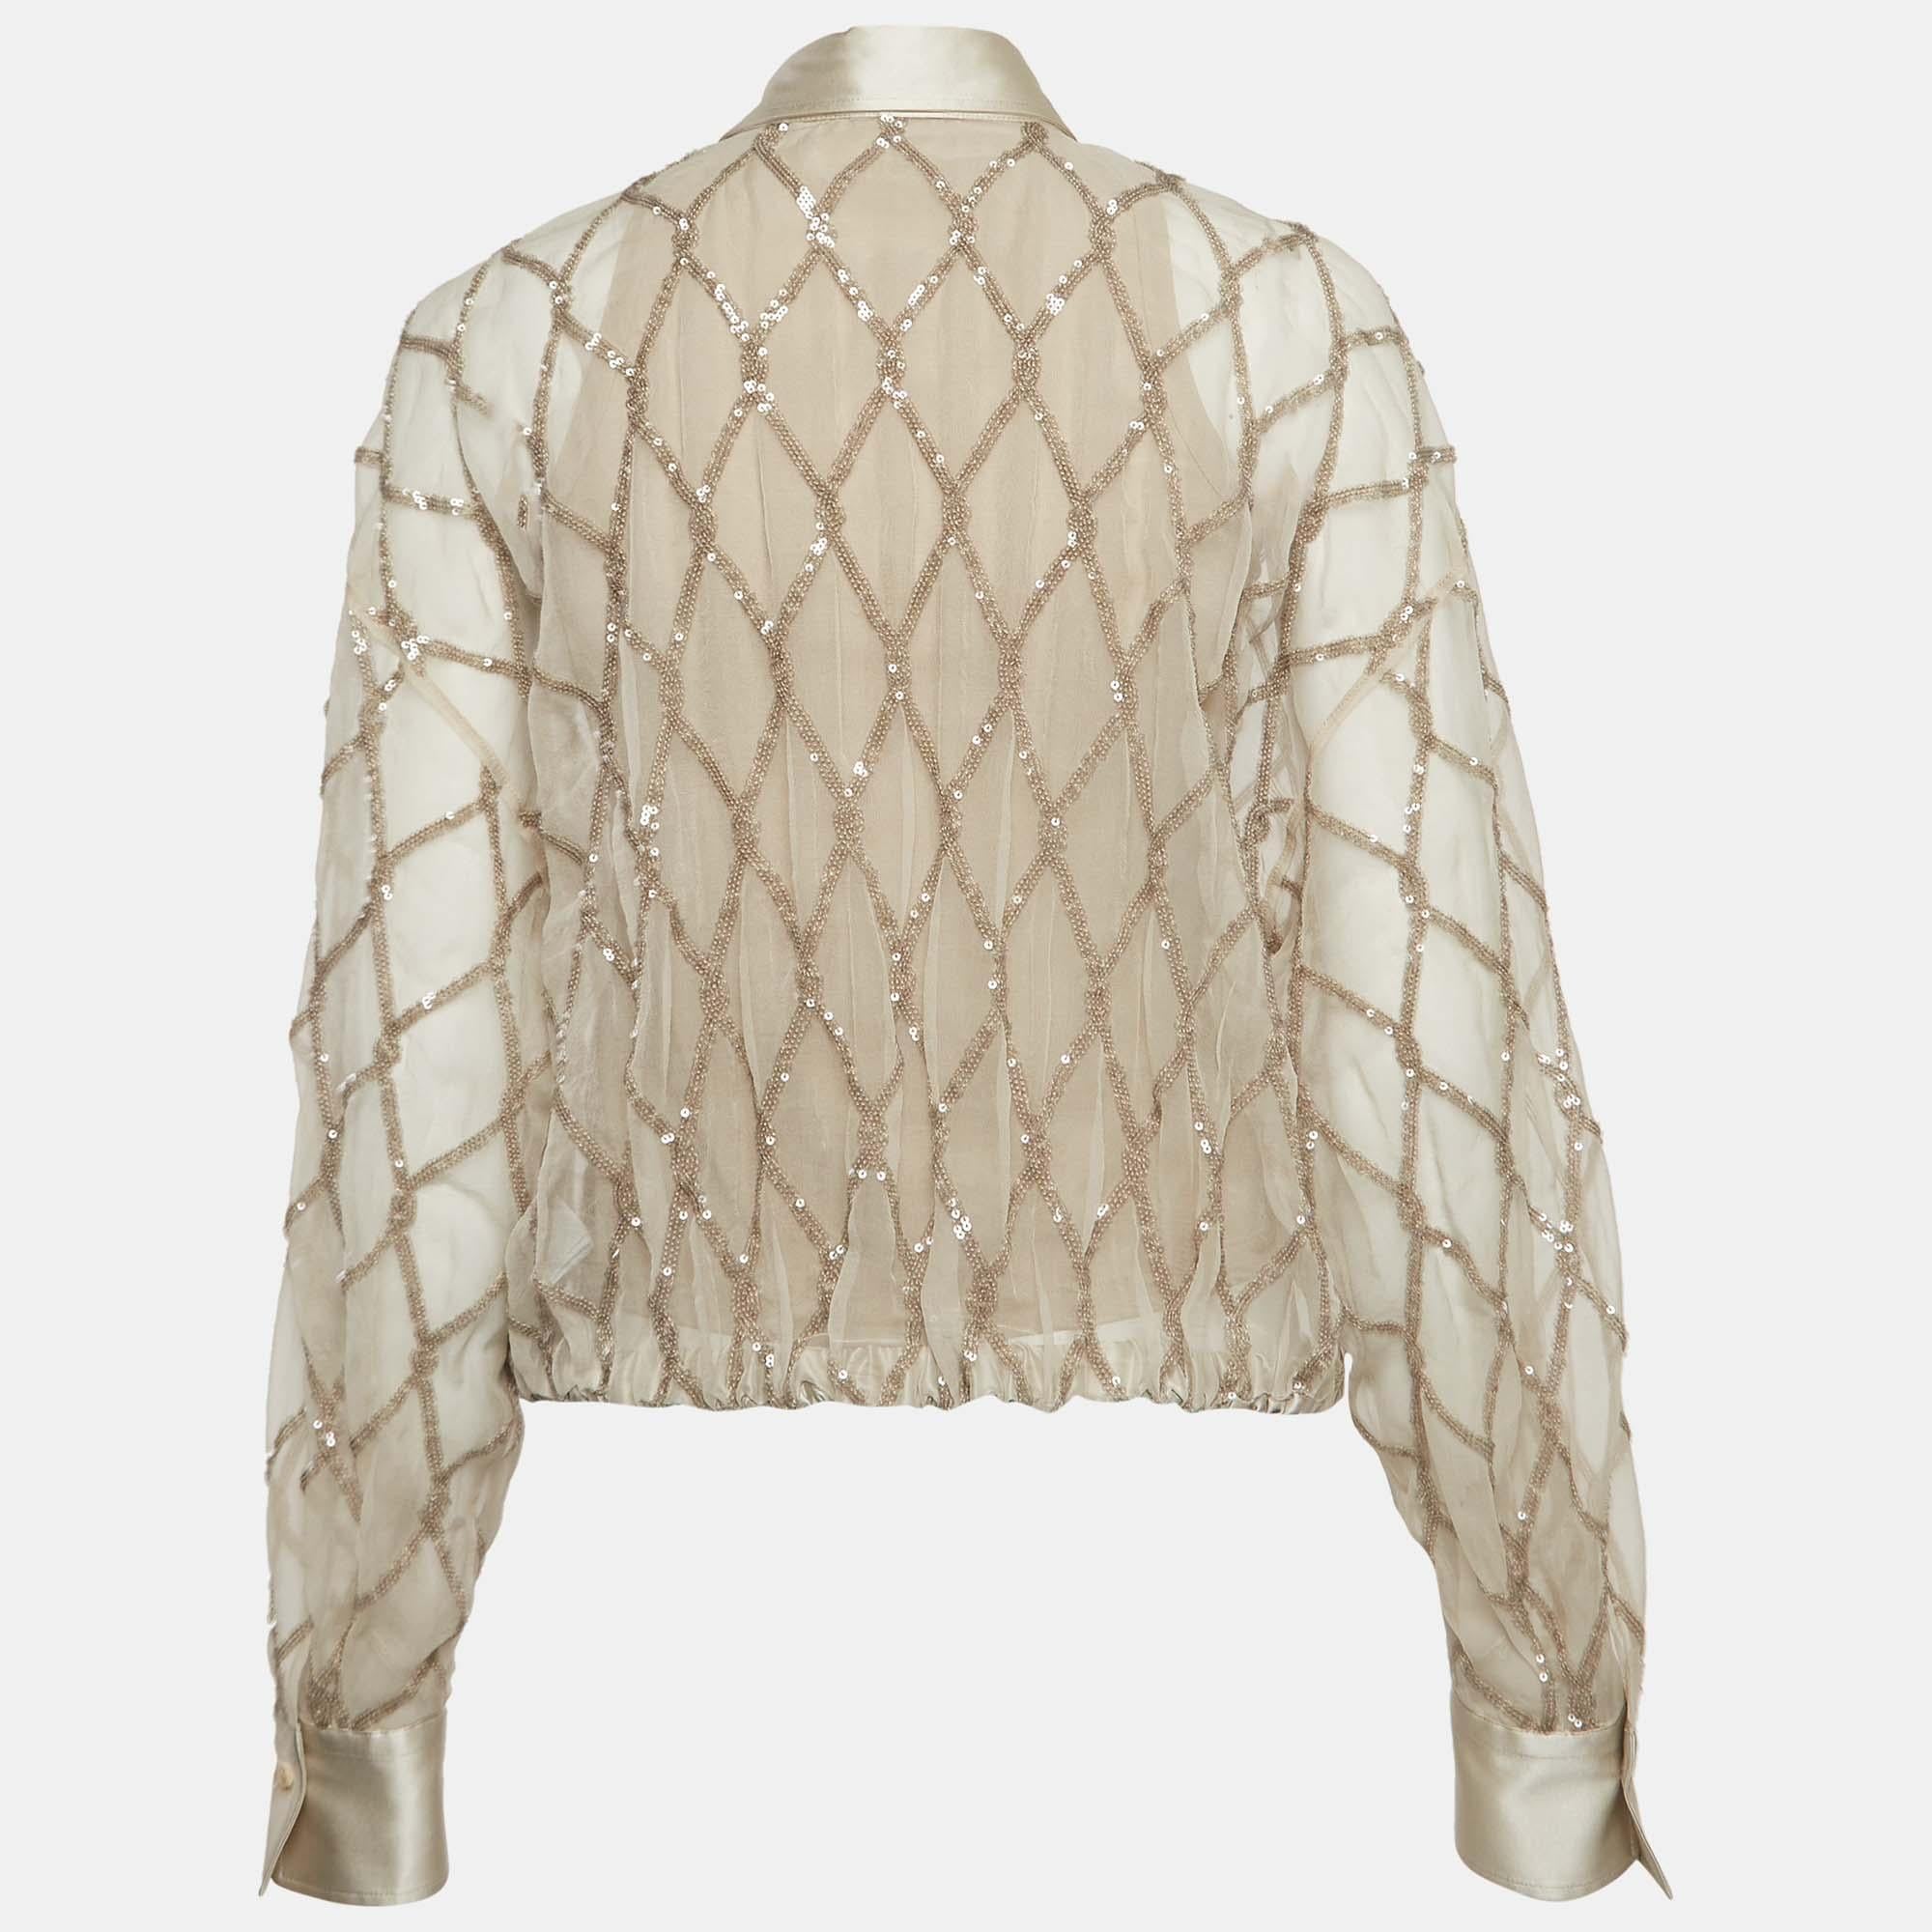 Whether you want to go out on casual outings with friends or just want to lounge around, this Brunello Cucinelli shirt is a versatile piece and can be styled in many ways. It has been made using silk and elevated with eye-catching sequins.

